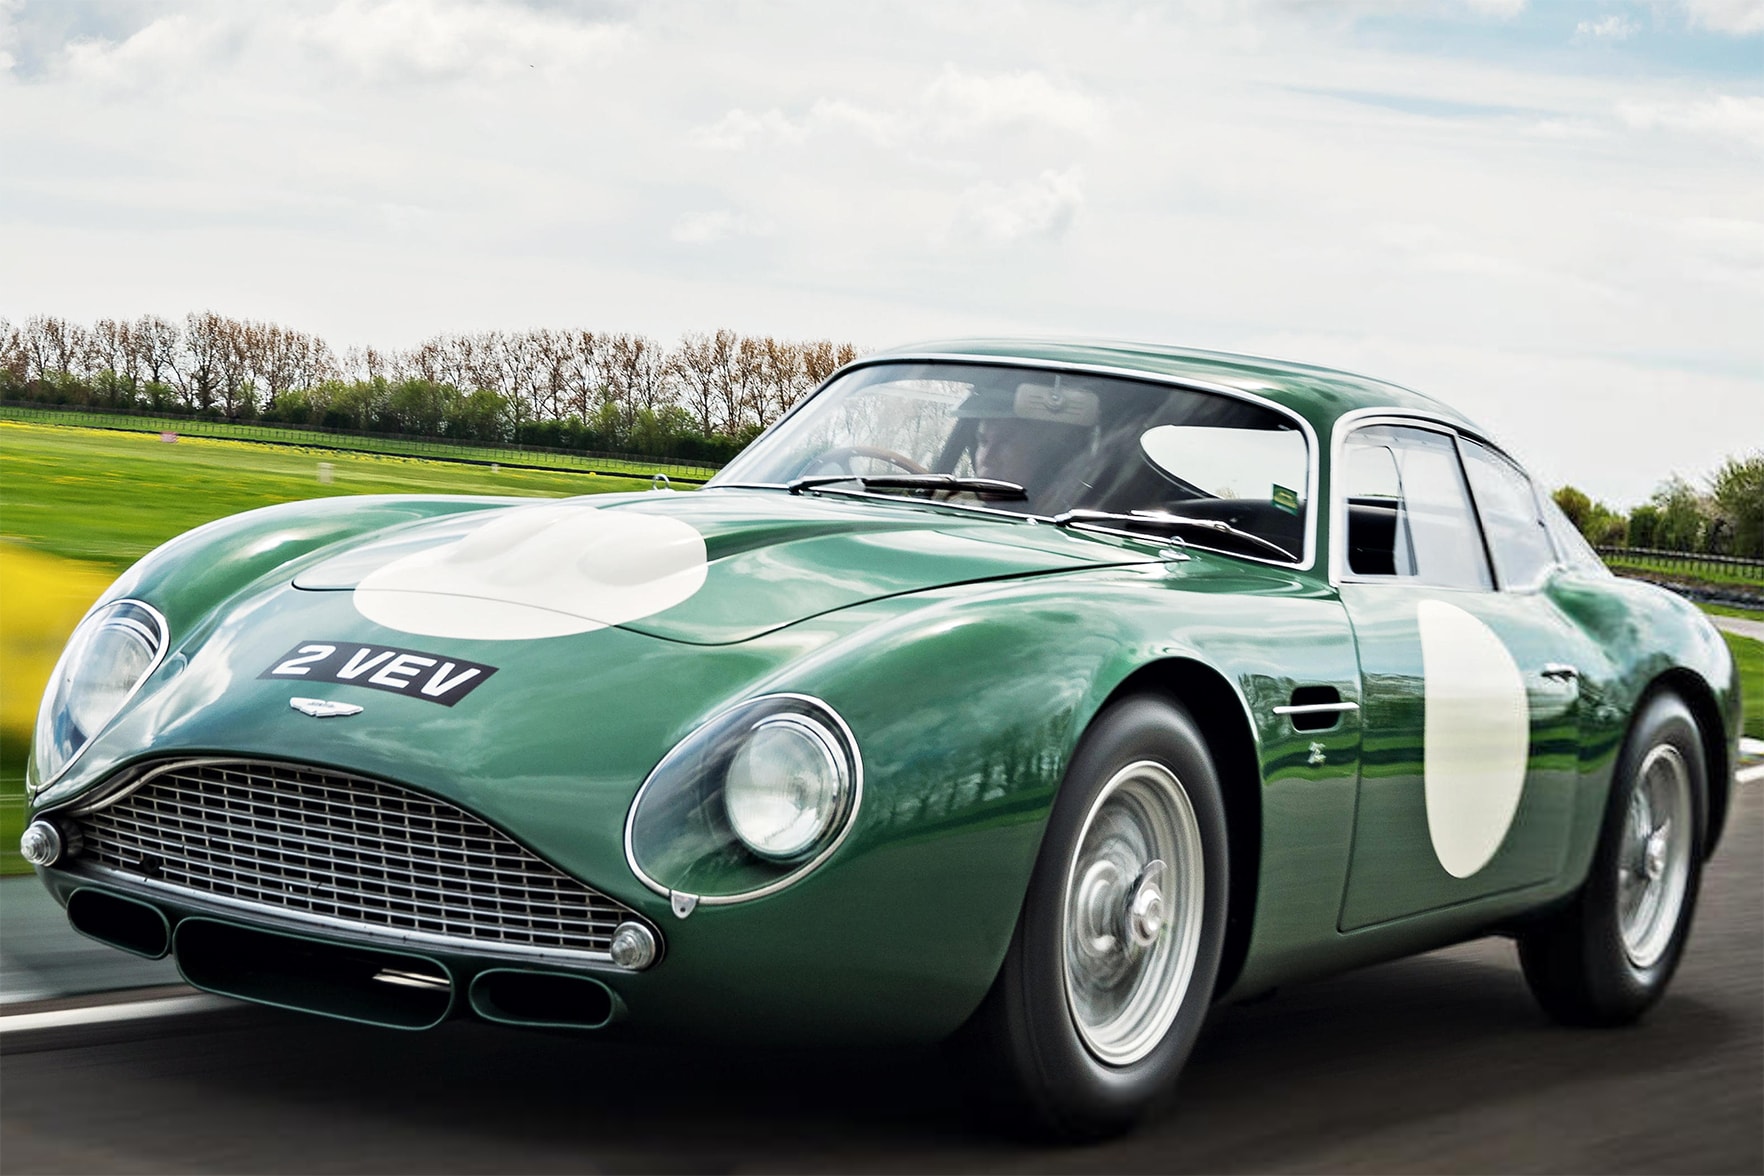 Aston Martin 'MP209' DB4GT ZAGATO Auction For Sale Most Expensive British Car Ever Sold Europe Luxury Car Rental